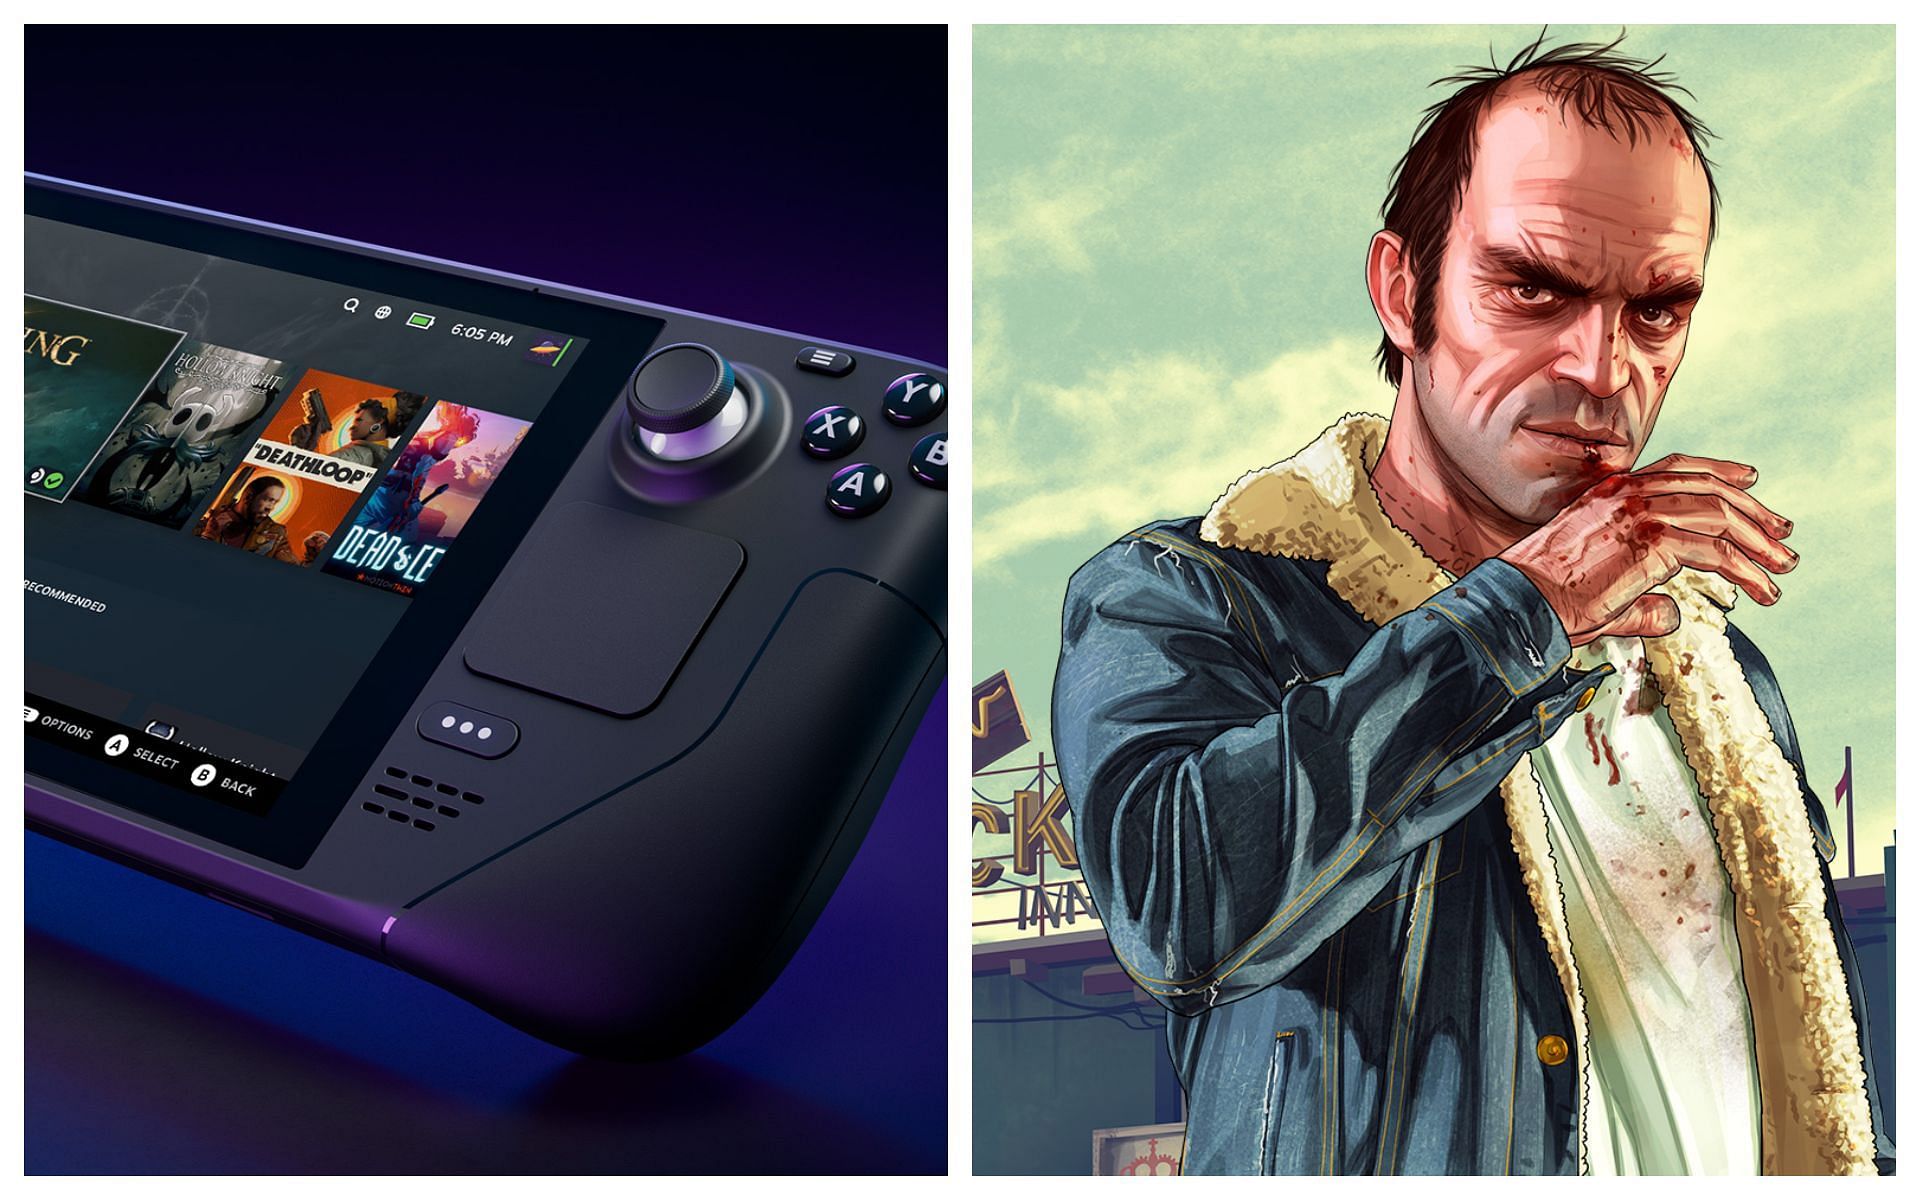 Grand Theft Auto 5 is still very relevant (Images via Steam/Rockstar Games)